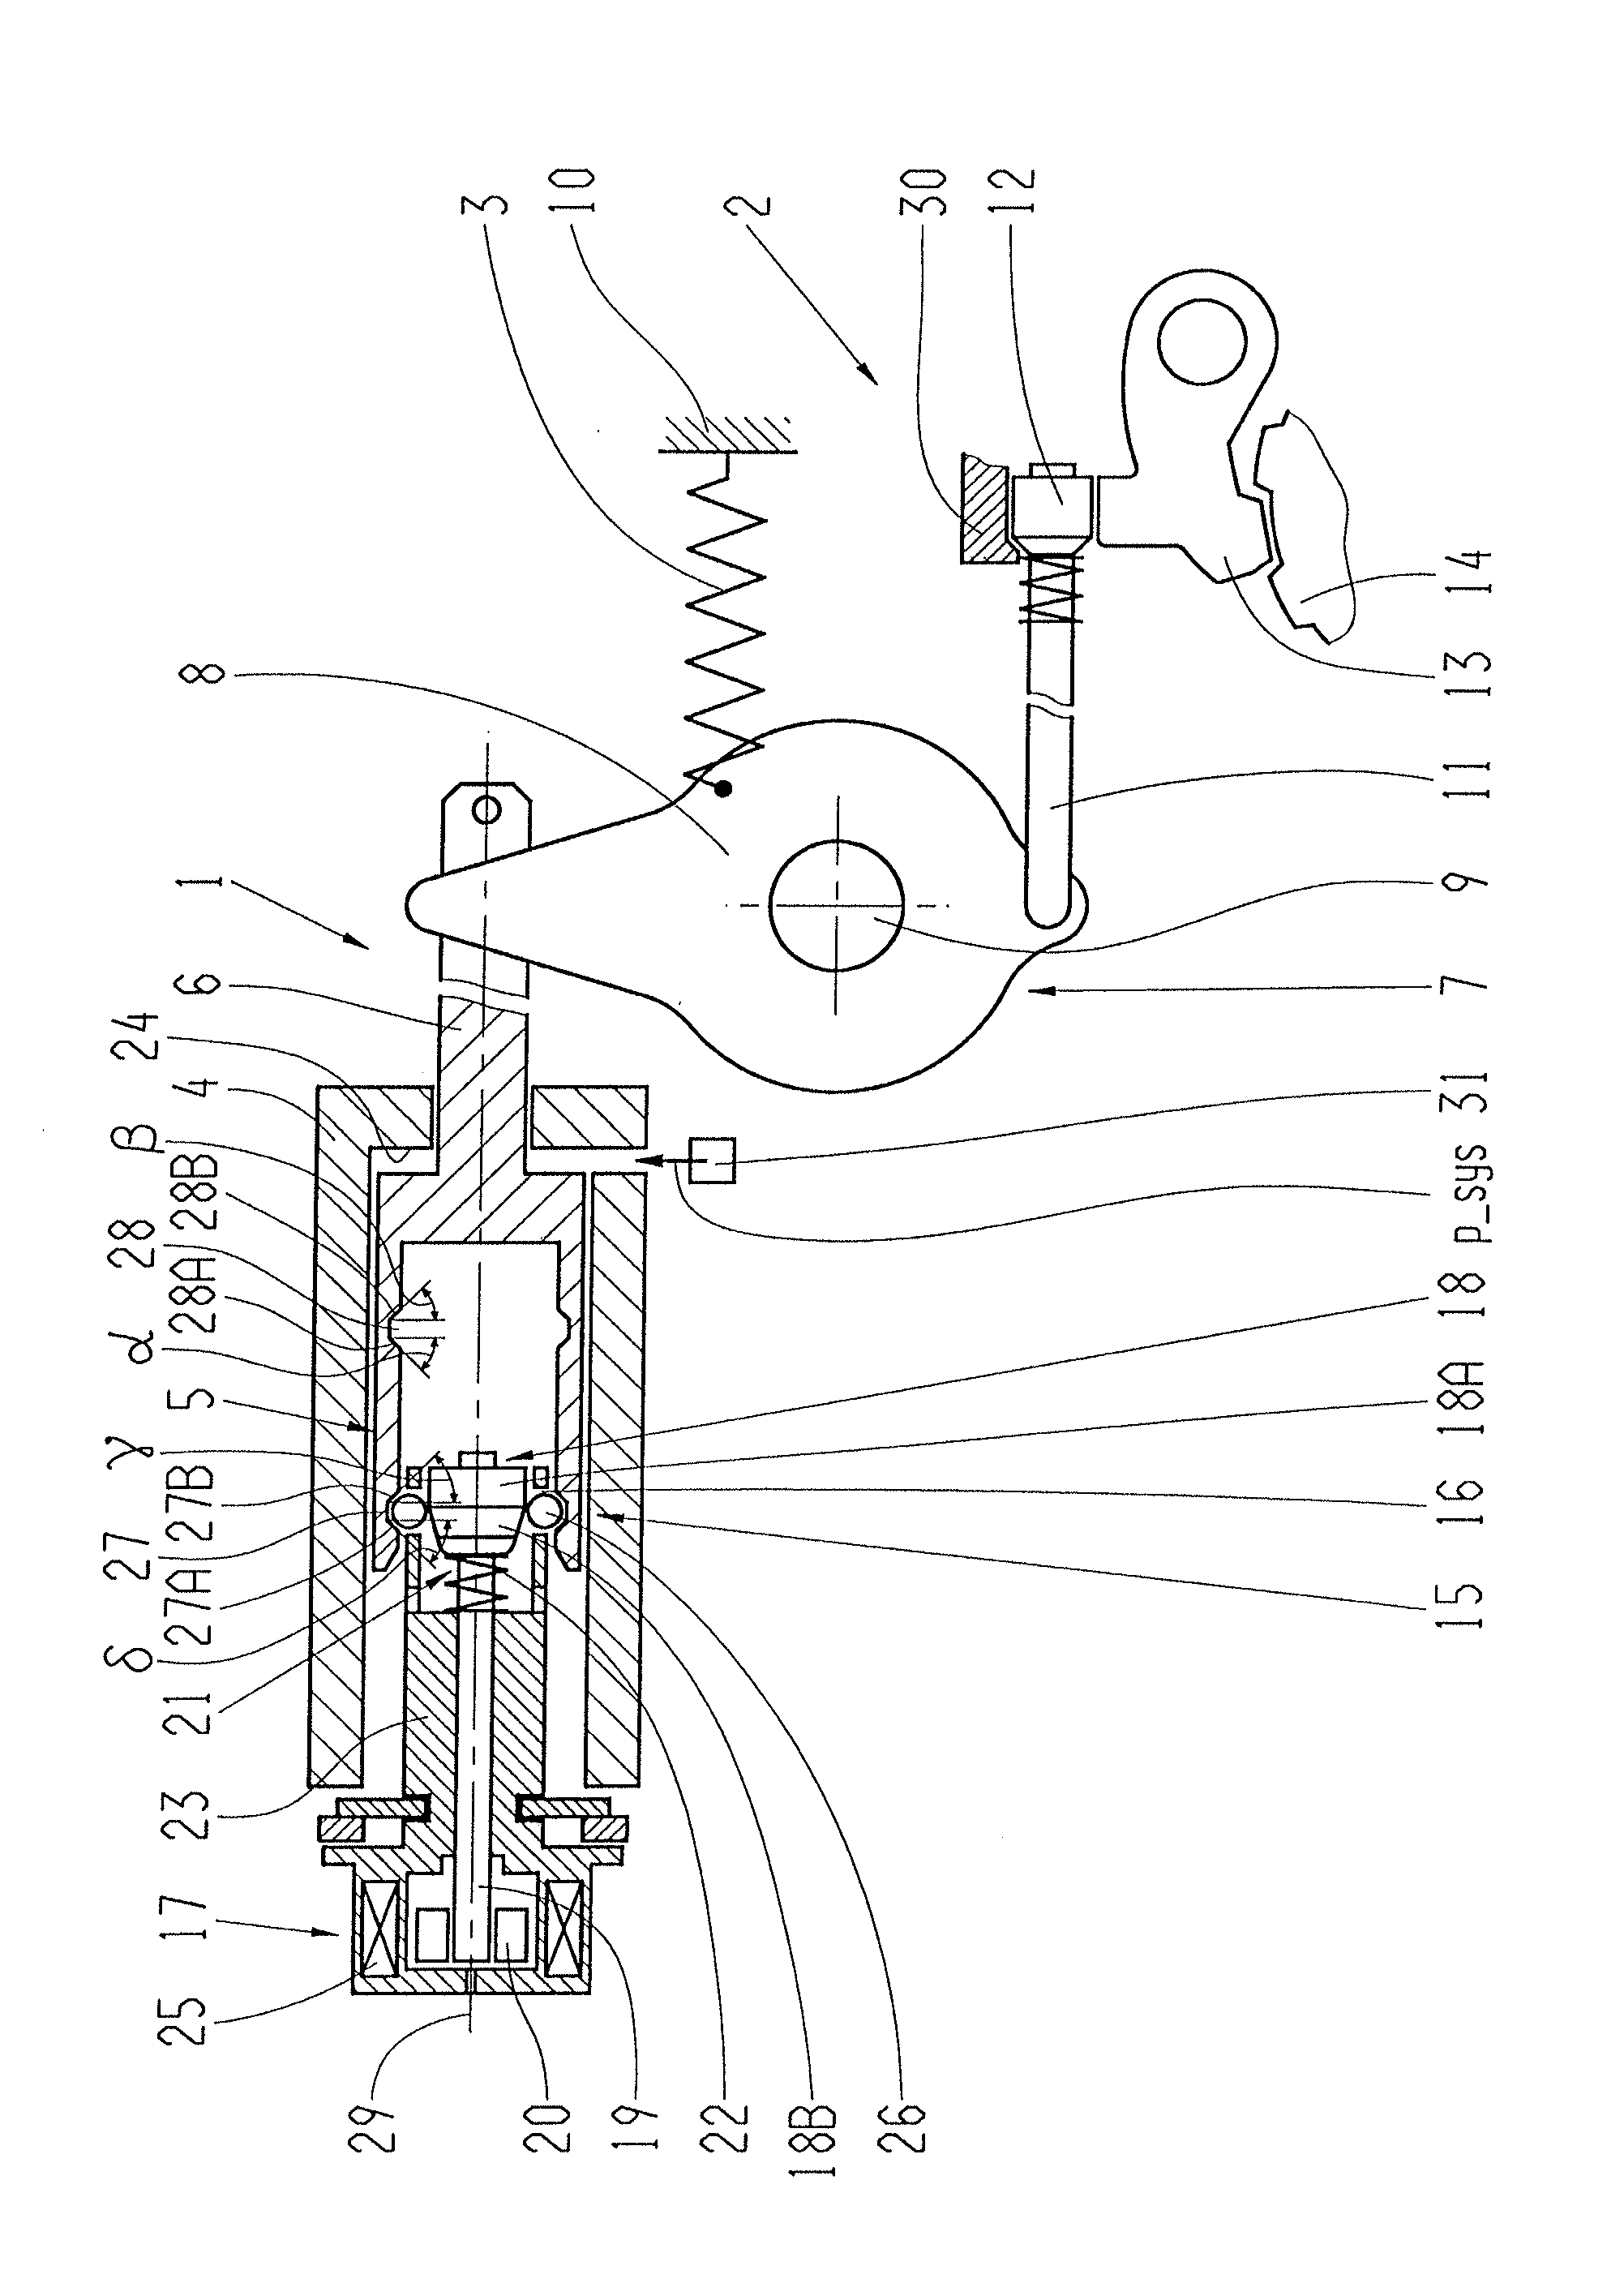 Device for actuating a locking mechanism